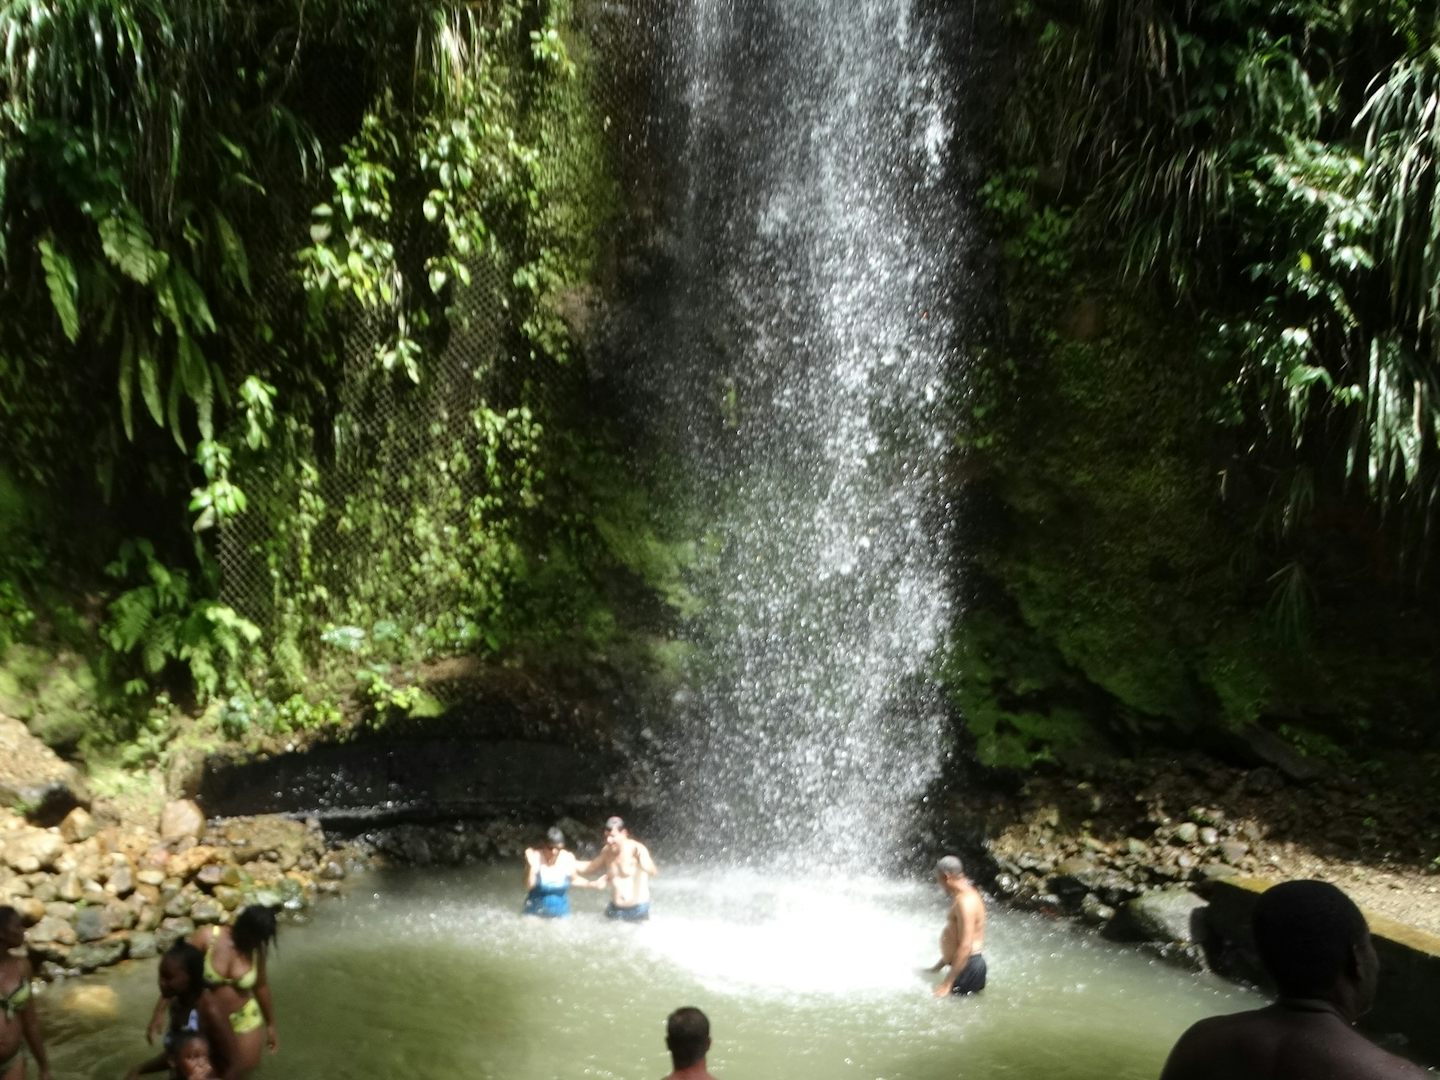 On Curacao.  We had a mud bath, then went to this falls.  The water was col